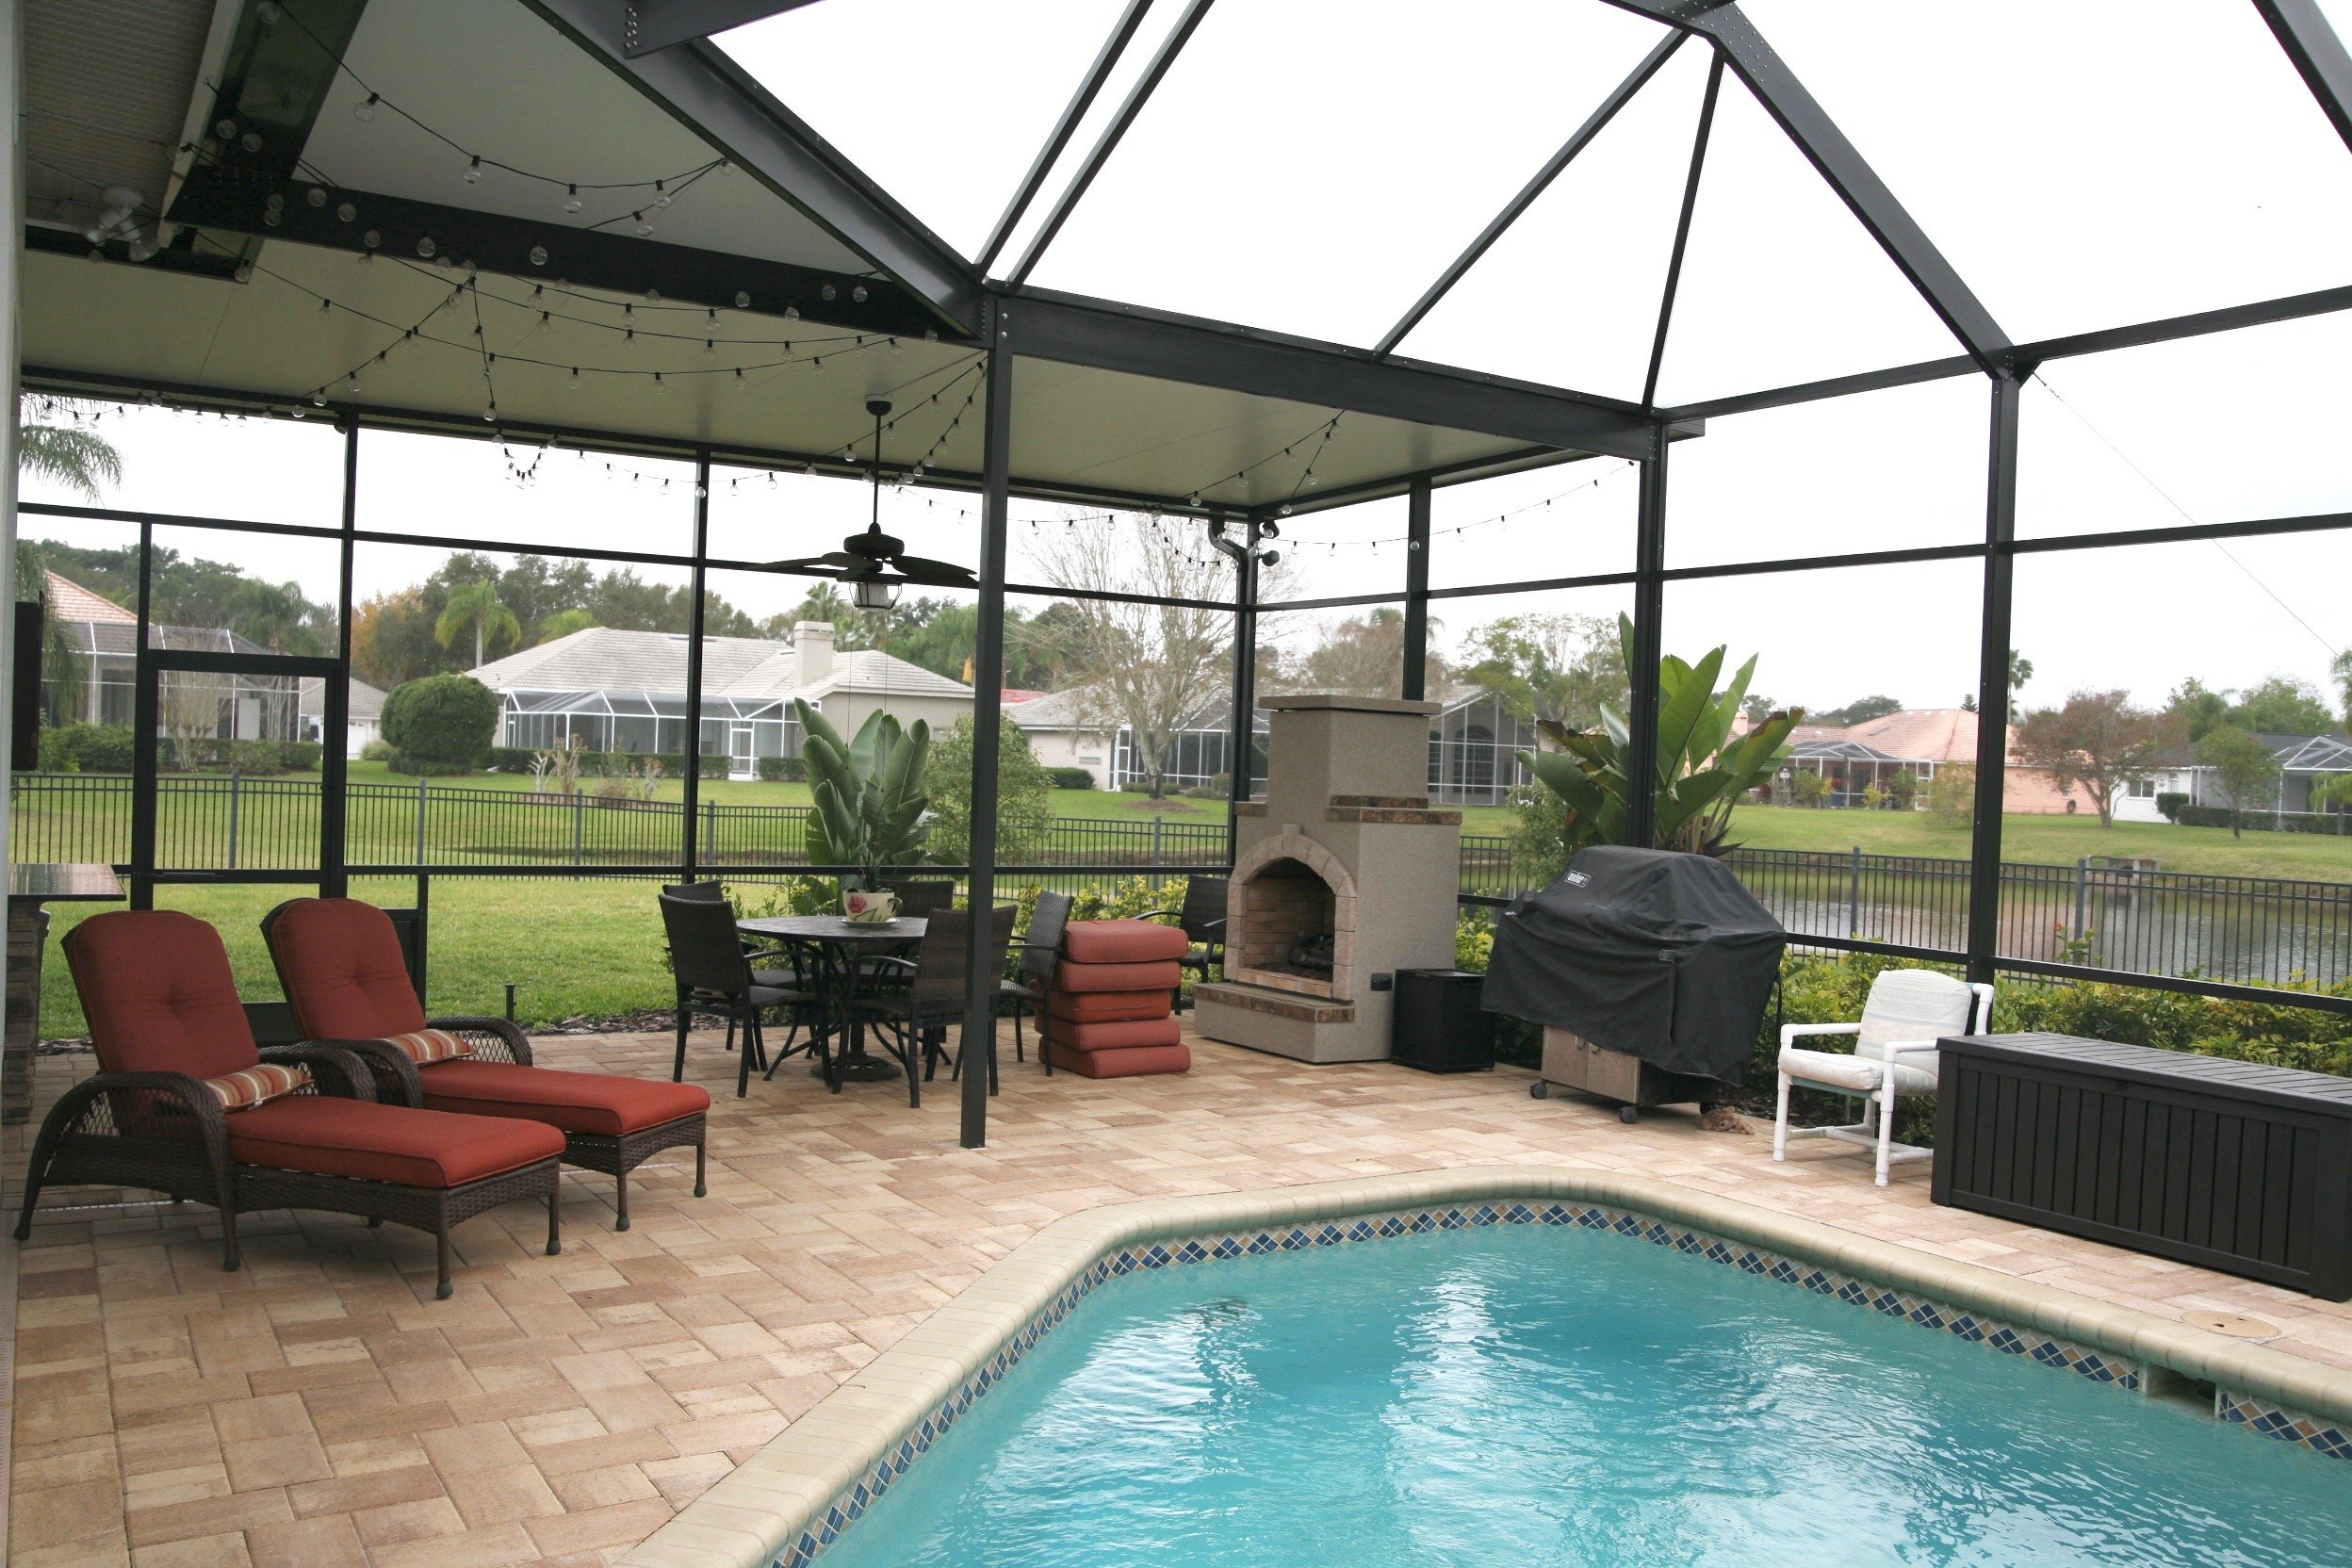 Patio Product Installation Tampa Bay Area